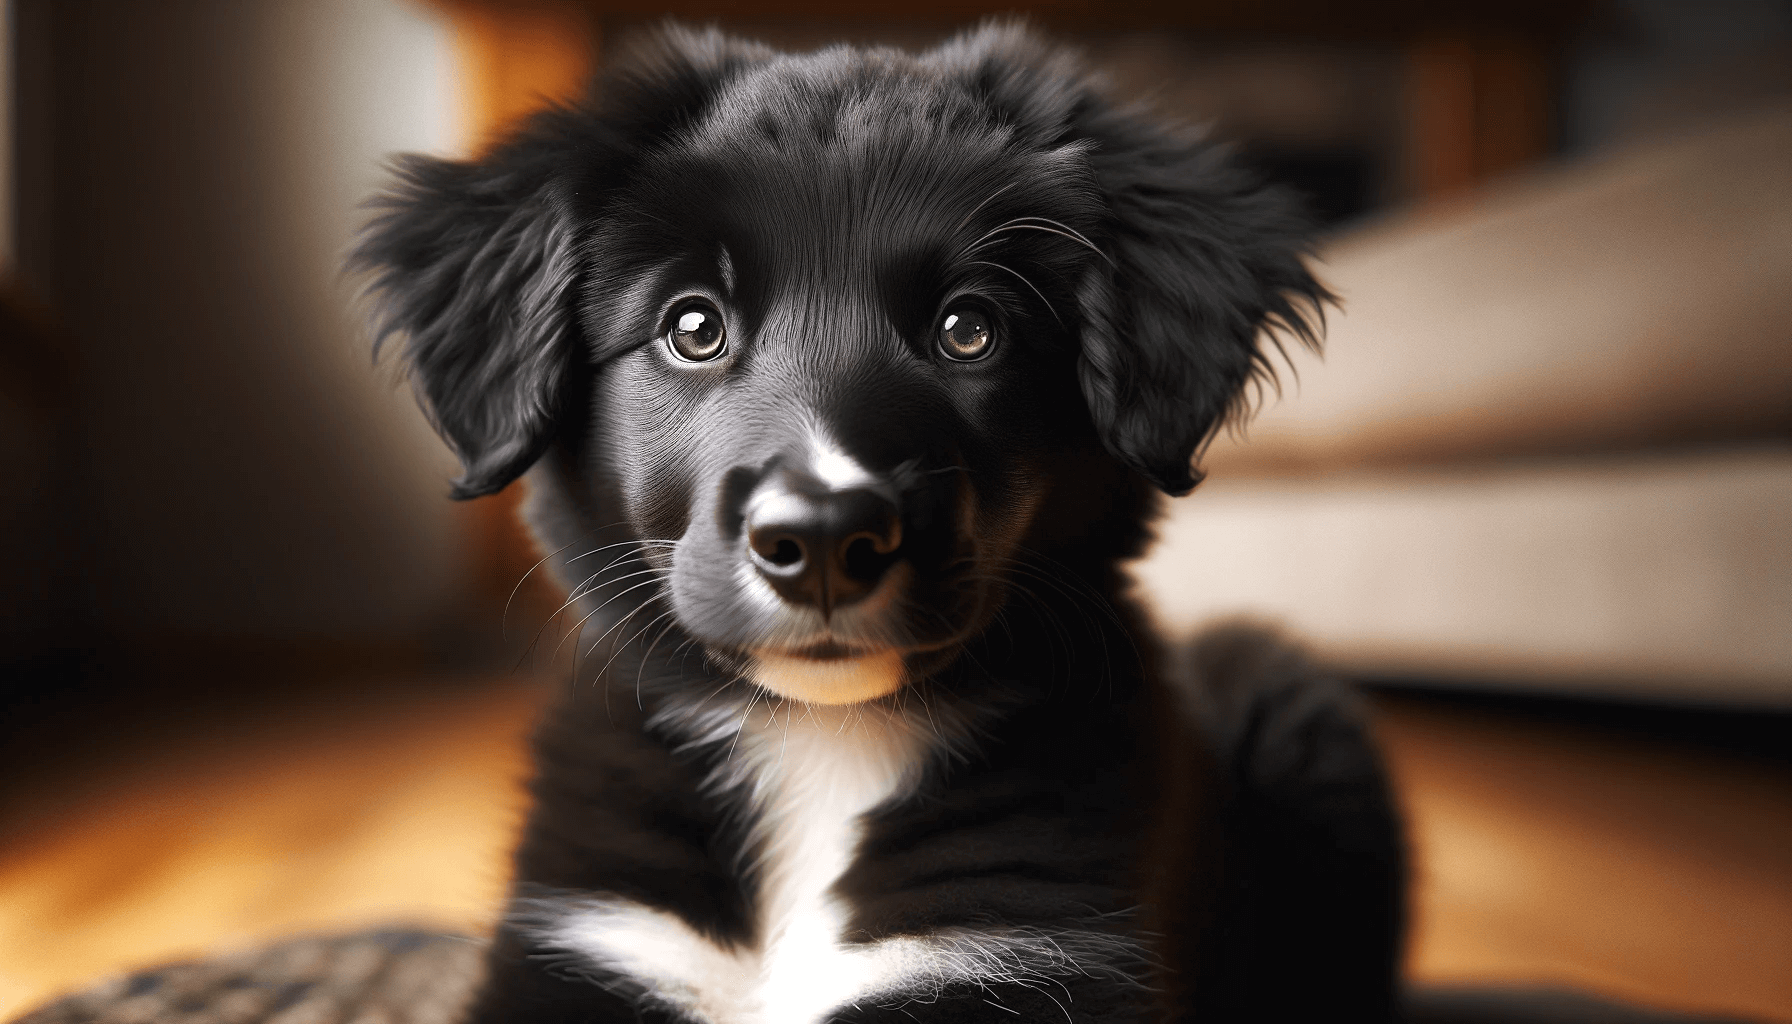 Borador Puppy Border Collie Lab Mix with an adorable expression, sporting a black coat with a distinctive white patch on the chest.